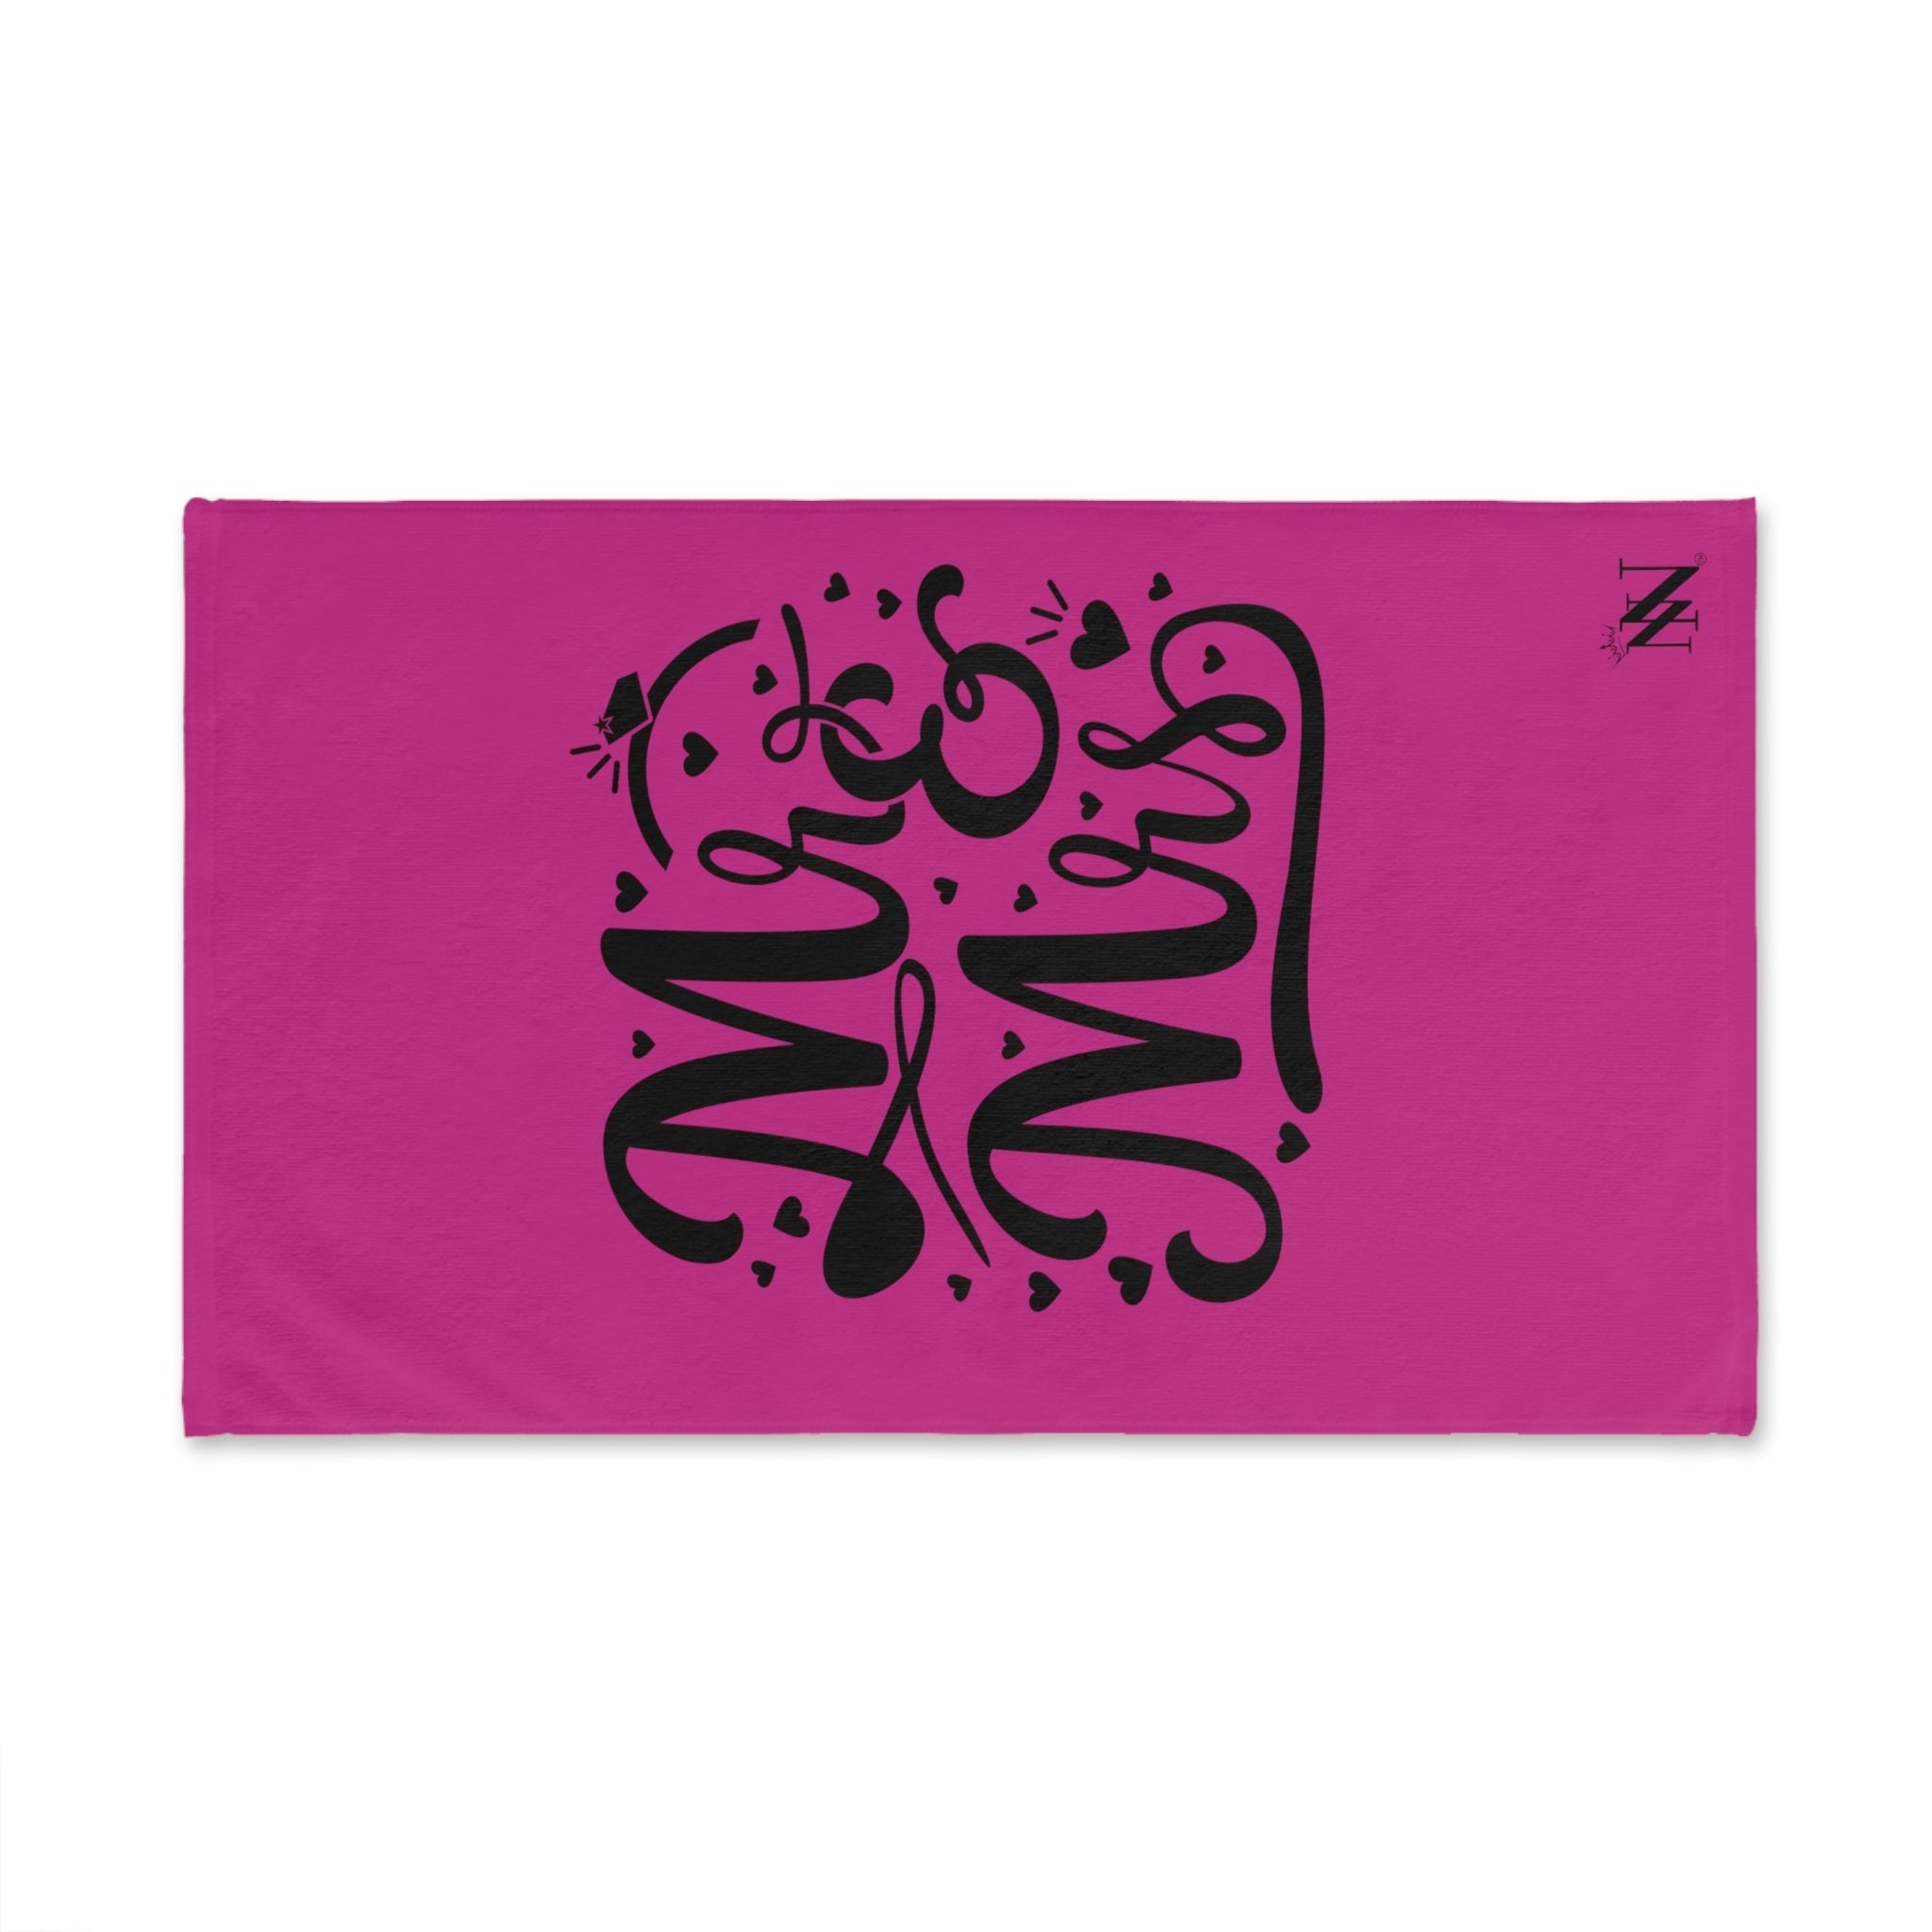 Mr Mrs Bride Fuscia | Funny Gifts for Men - Gifts for Him - Birthday Gifts for Men, Him, Husband, Boyfriend, New Couple Gifts, Fathers & Valentines Day Gifts, Hand Towels NECTAR NAPKINS